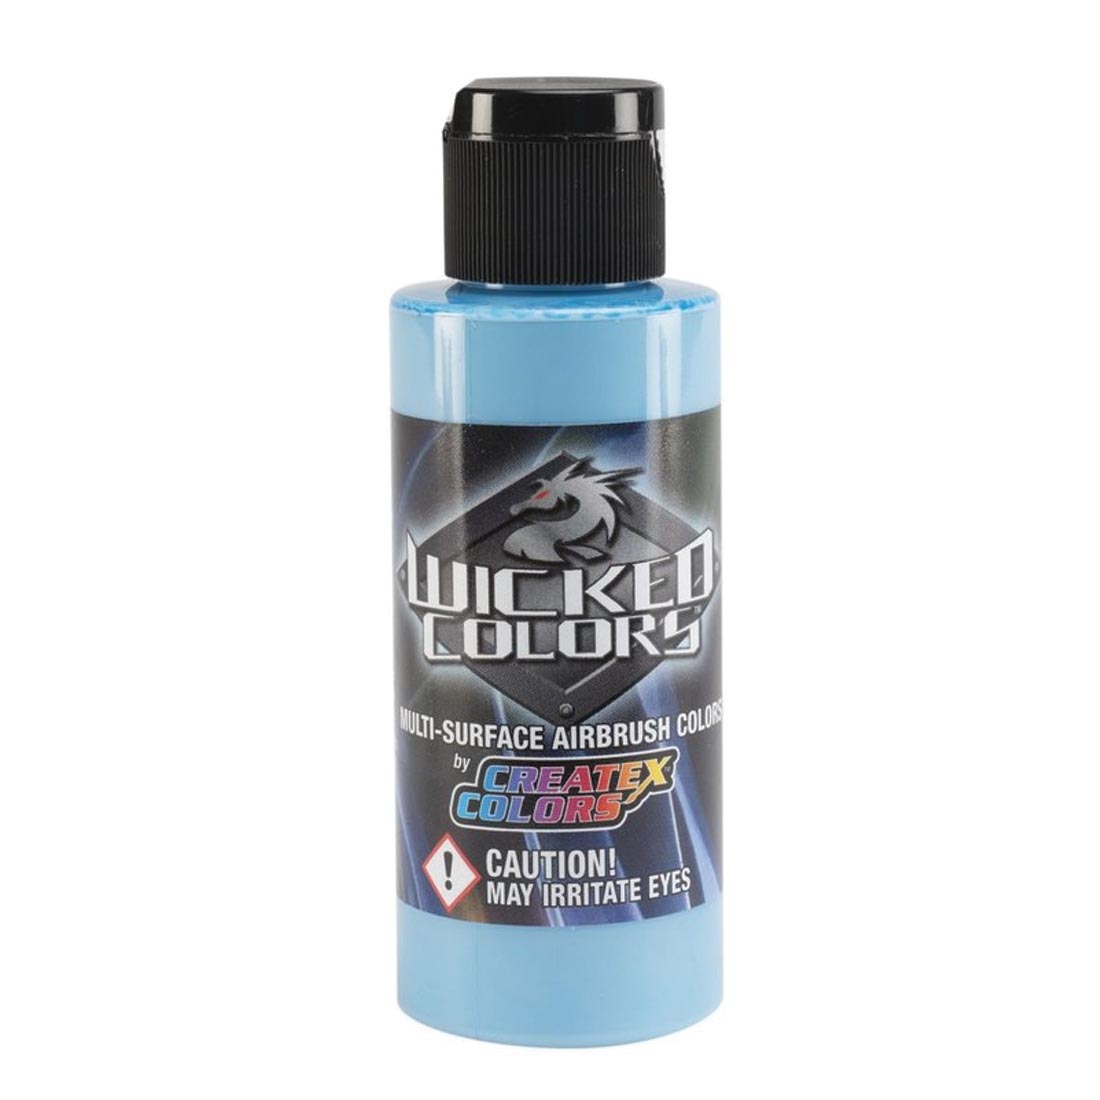 Bottle of Laguna Blue Createx Wicked Colors Airbrush Paint